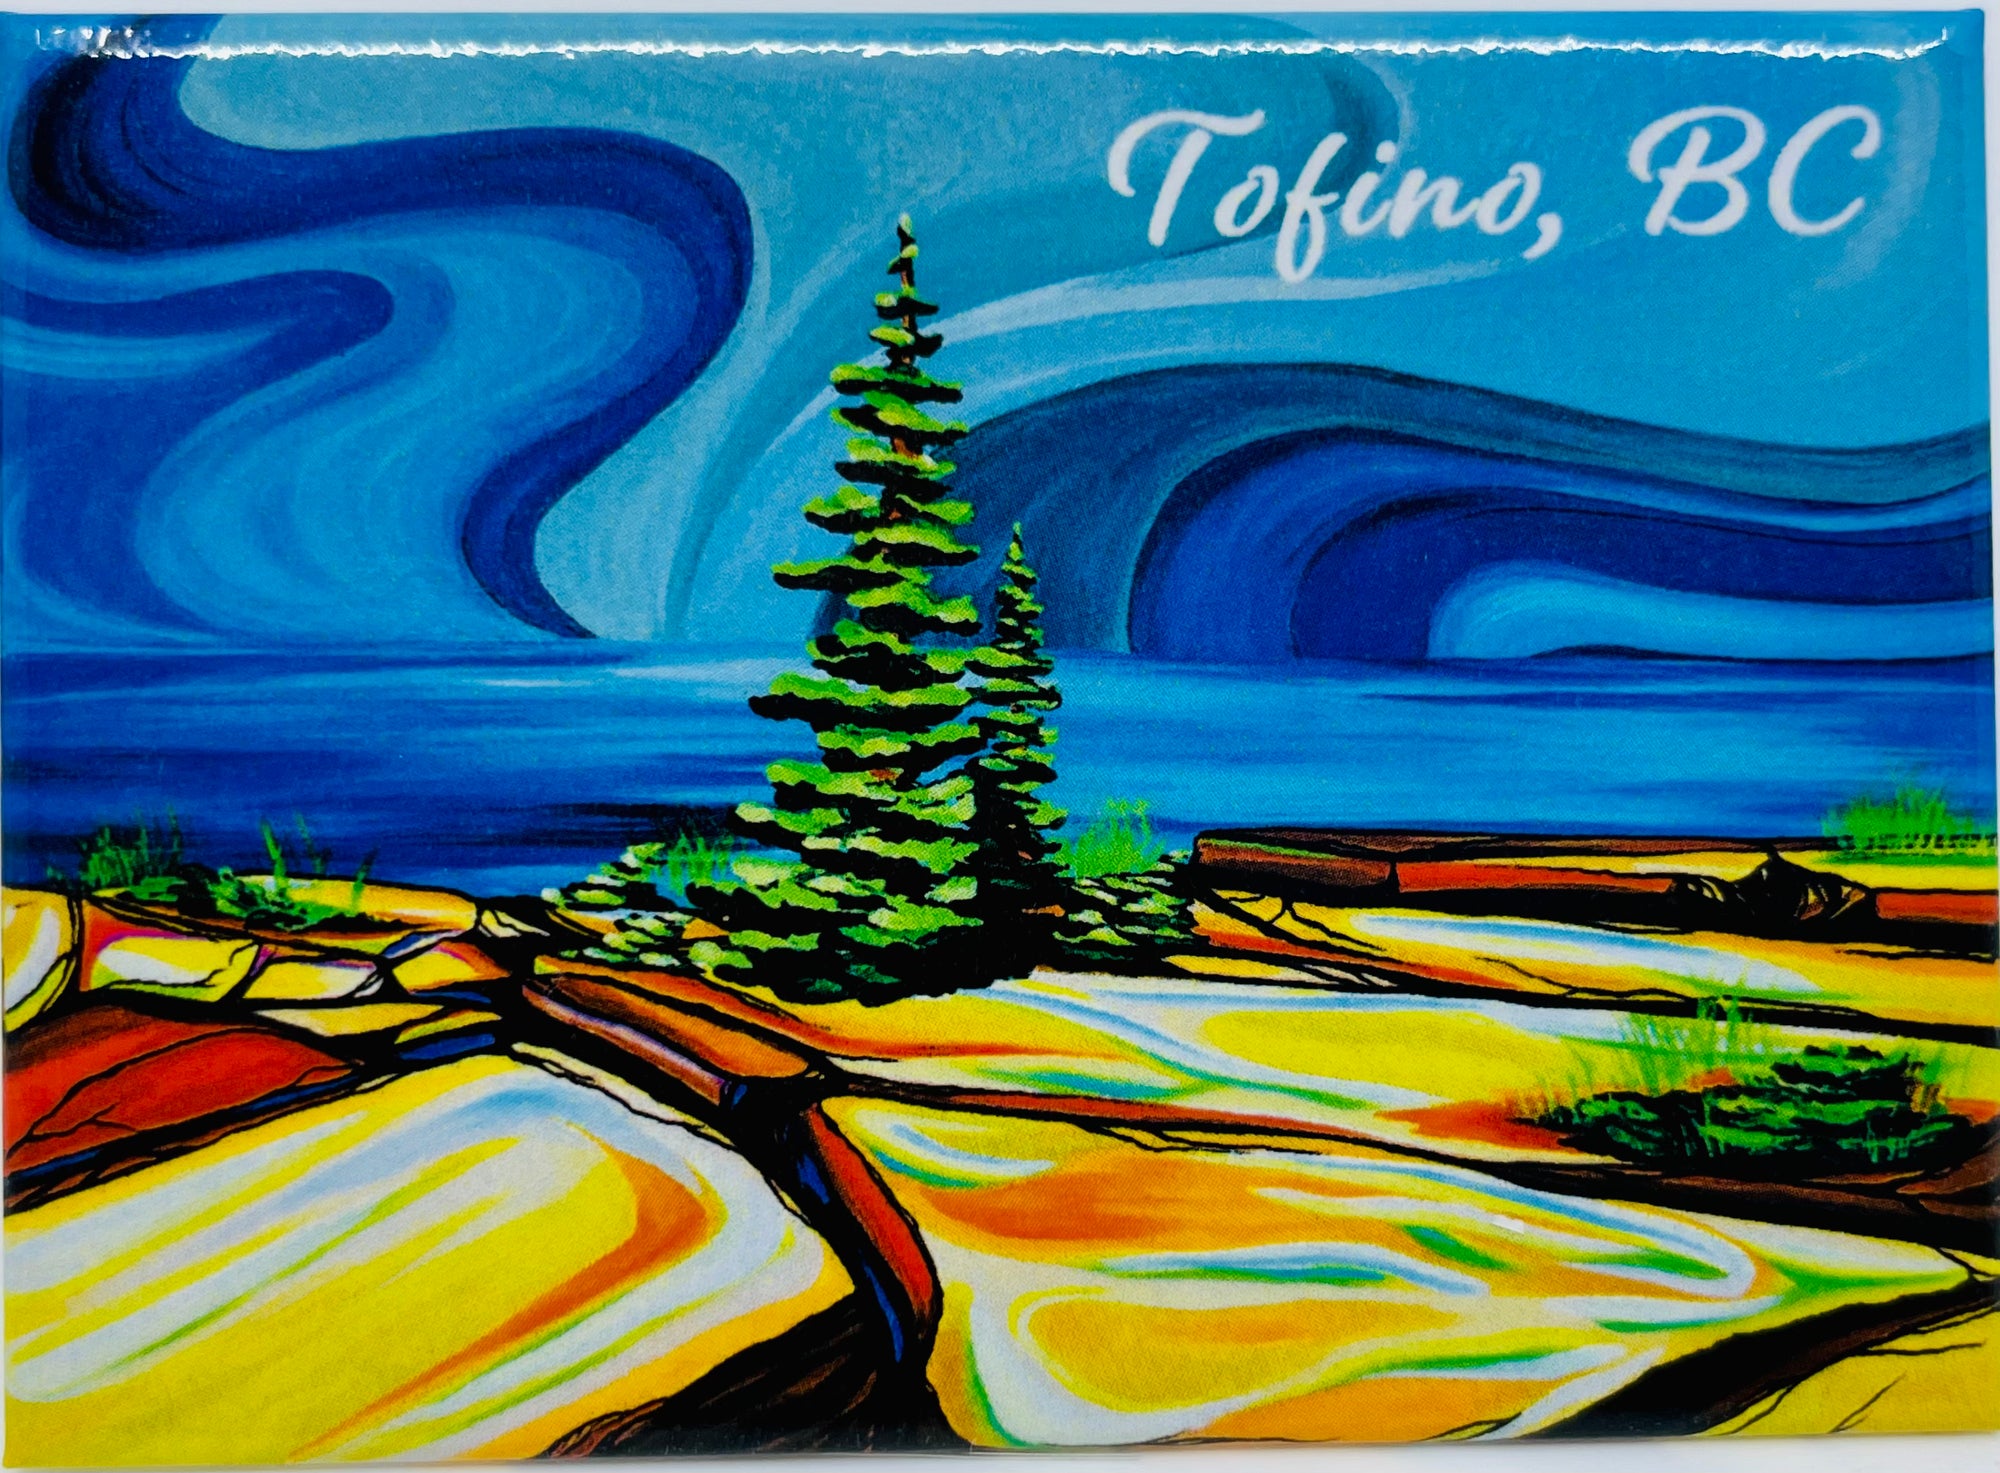 Magnet Shawna Boulette Grapentine Precious Memories “Tofino” - Magnet Shawna Boulette Grapentine Precious Memories “Tofino” -  - House of Himwitsa Native Art Gallery and Gifts